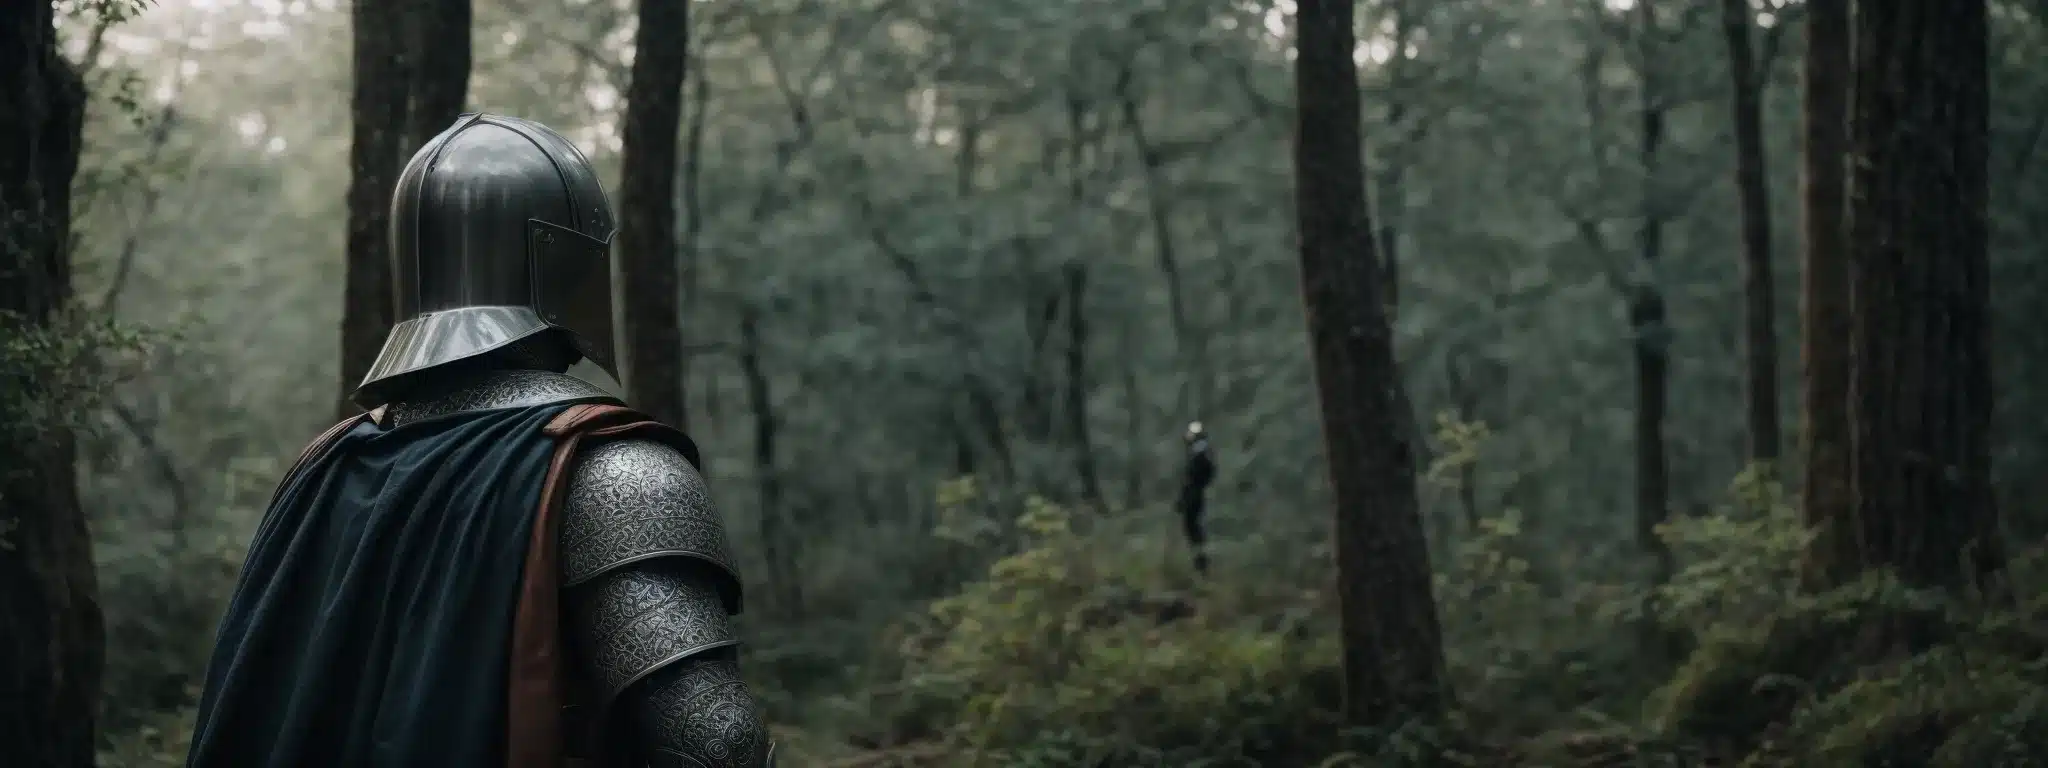 A Knight In Shining Armor Stands At The Edge Of An Ancient Forest, Symbolizing The Embodiment Of Strength And Adventure.